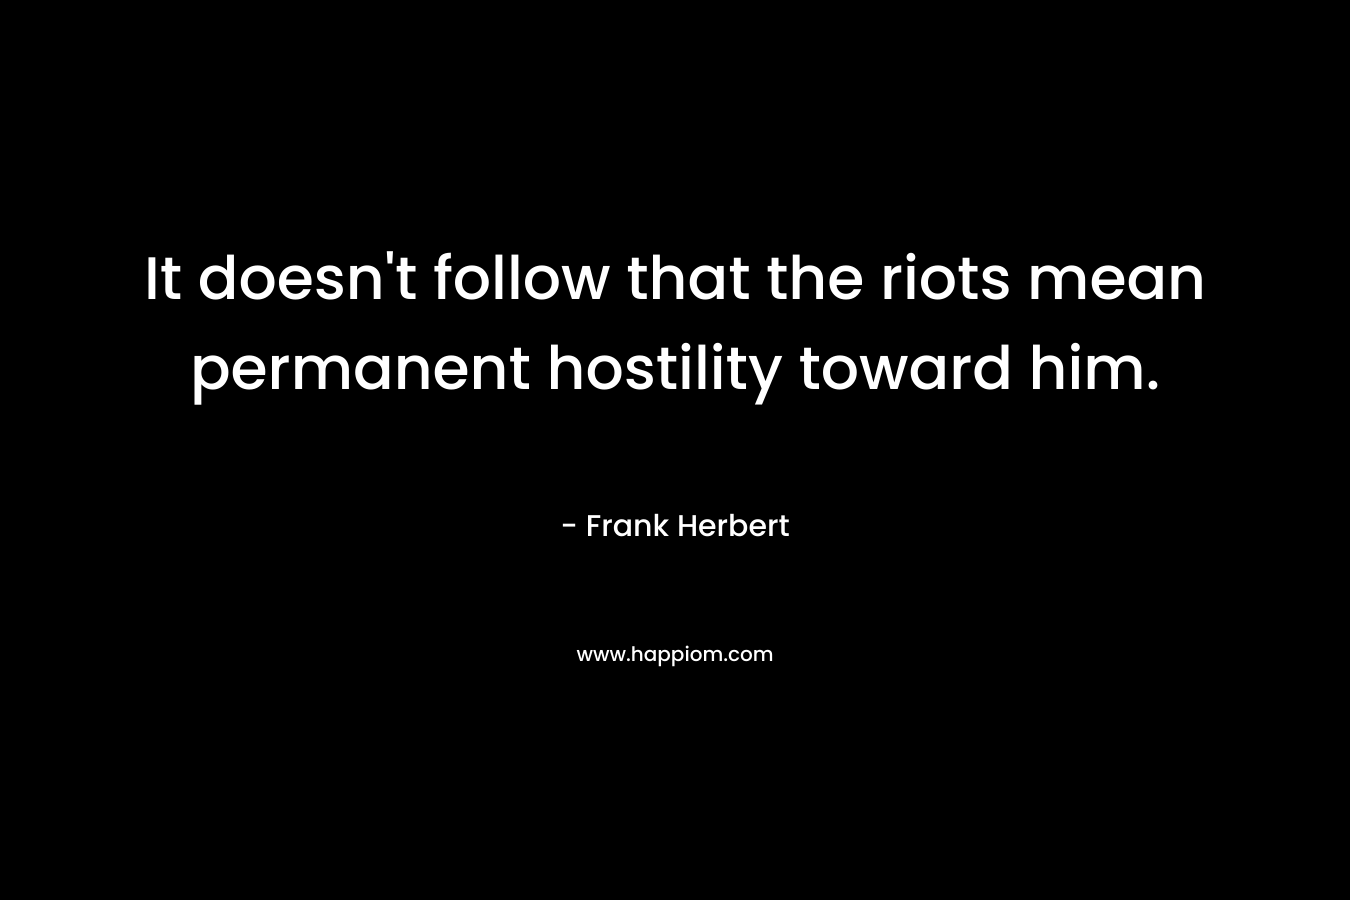 It doesn't follow that the riots mean permanent hostility toward him.